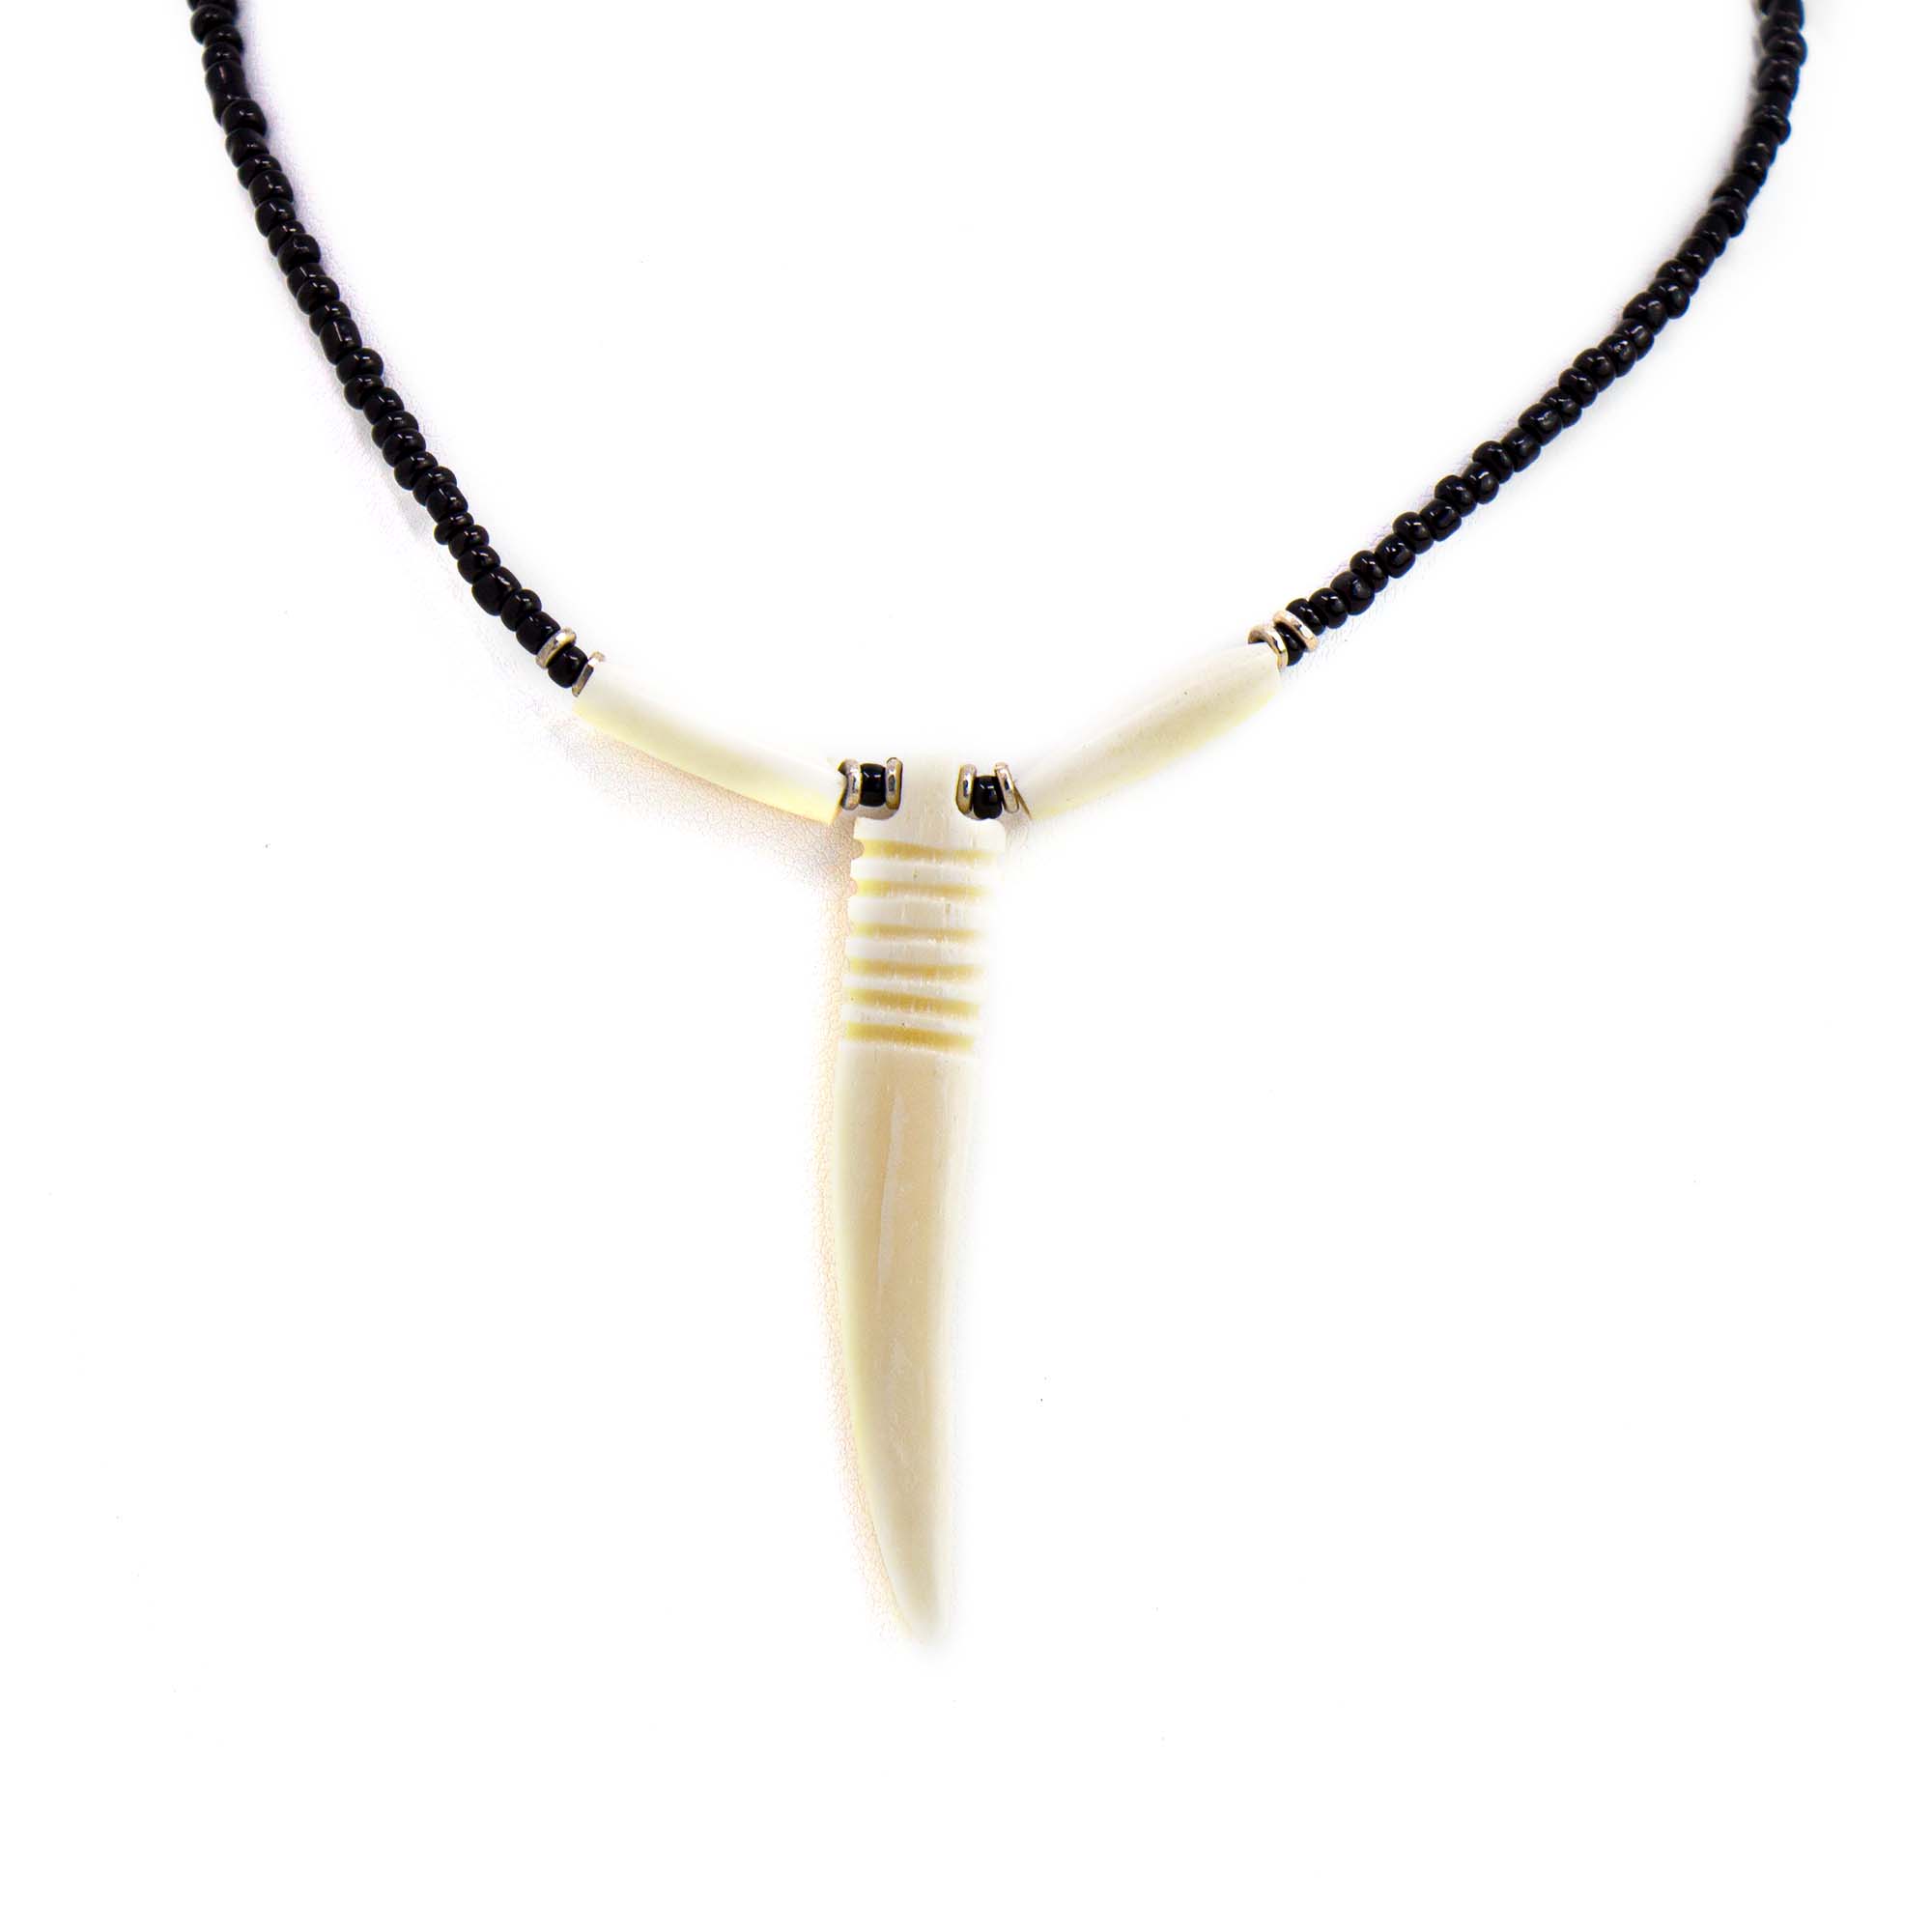 Bone "Tooth" Necklace on Leather Chain with Brass Closure - White Design